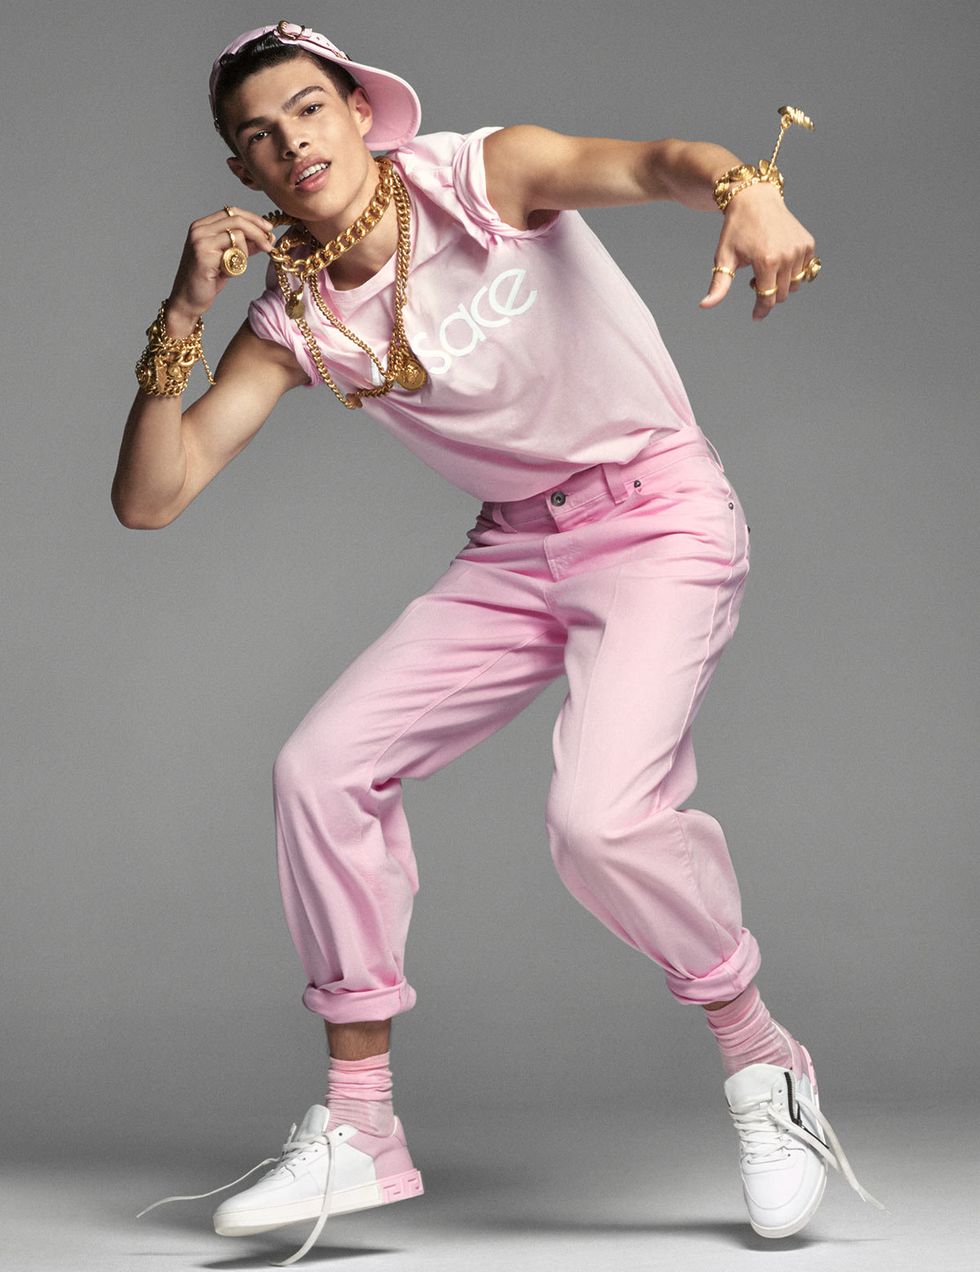 Pink, Hip-hop dance, Dance, Muscle, Performing arts, Photo shoot, Event, Photography, Performance, Dancer, 